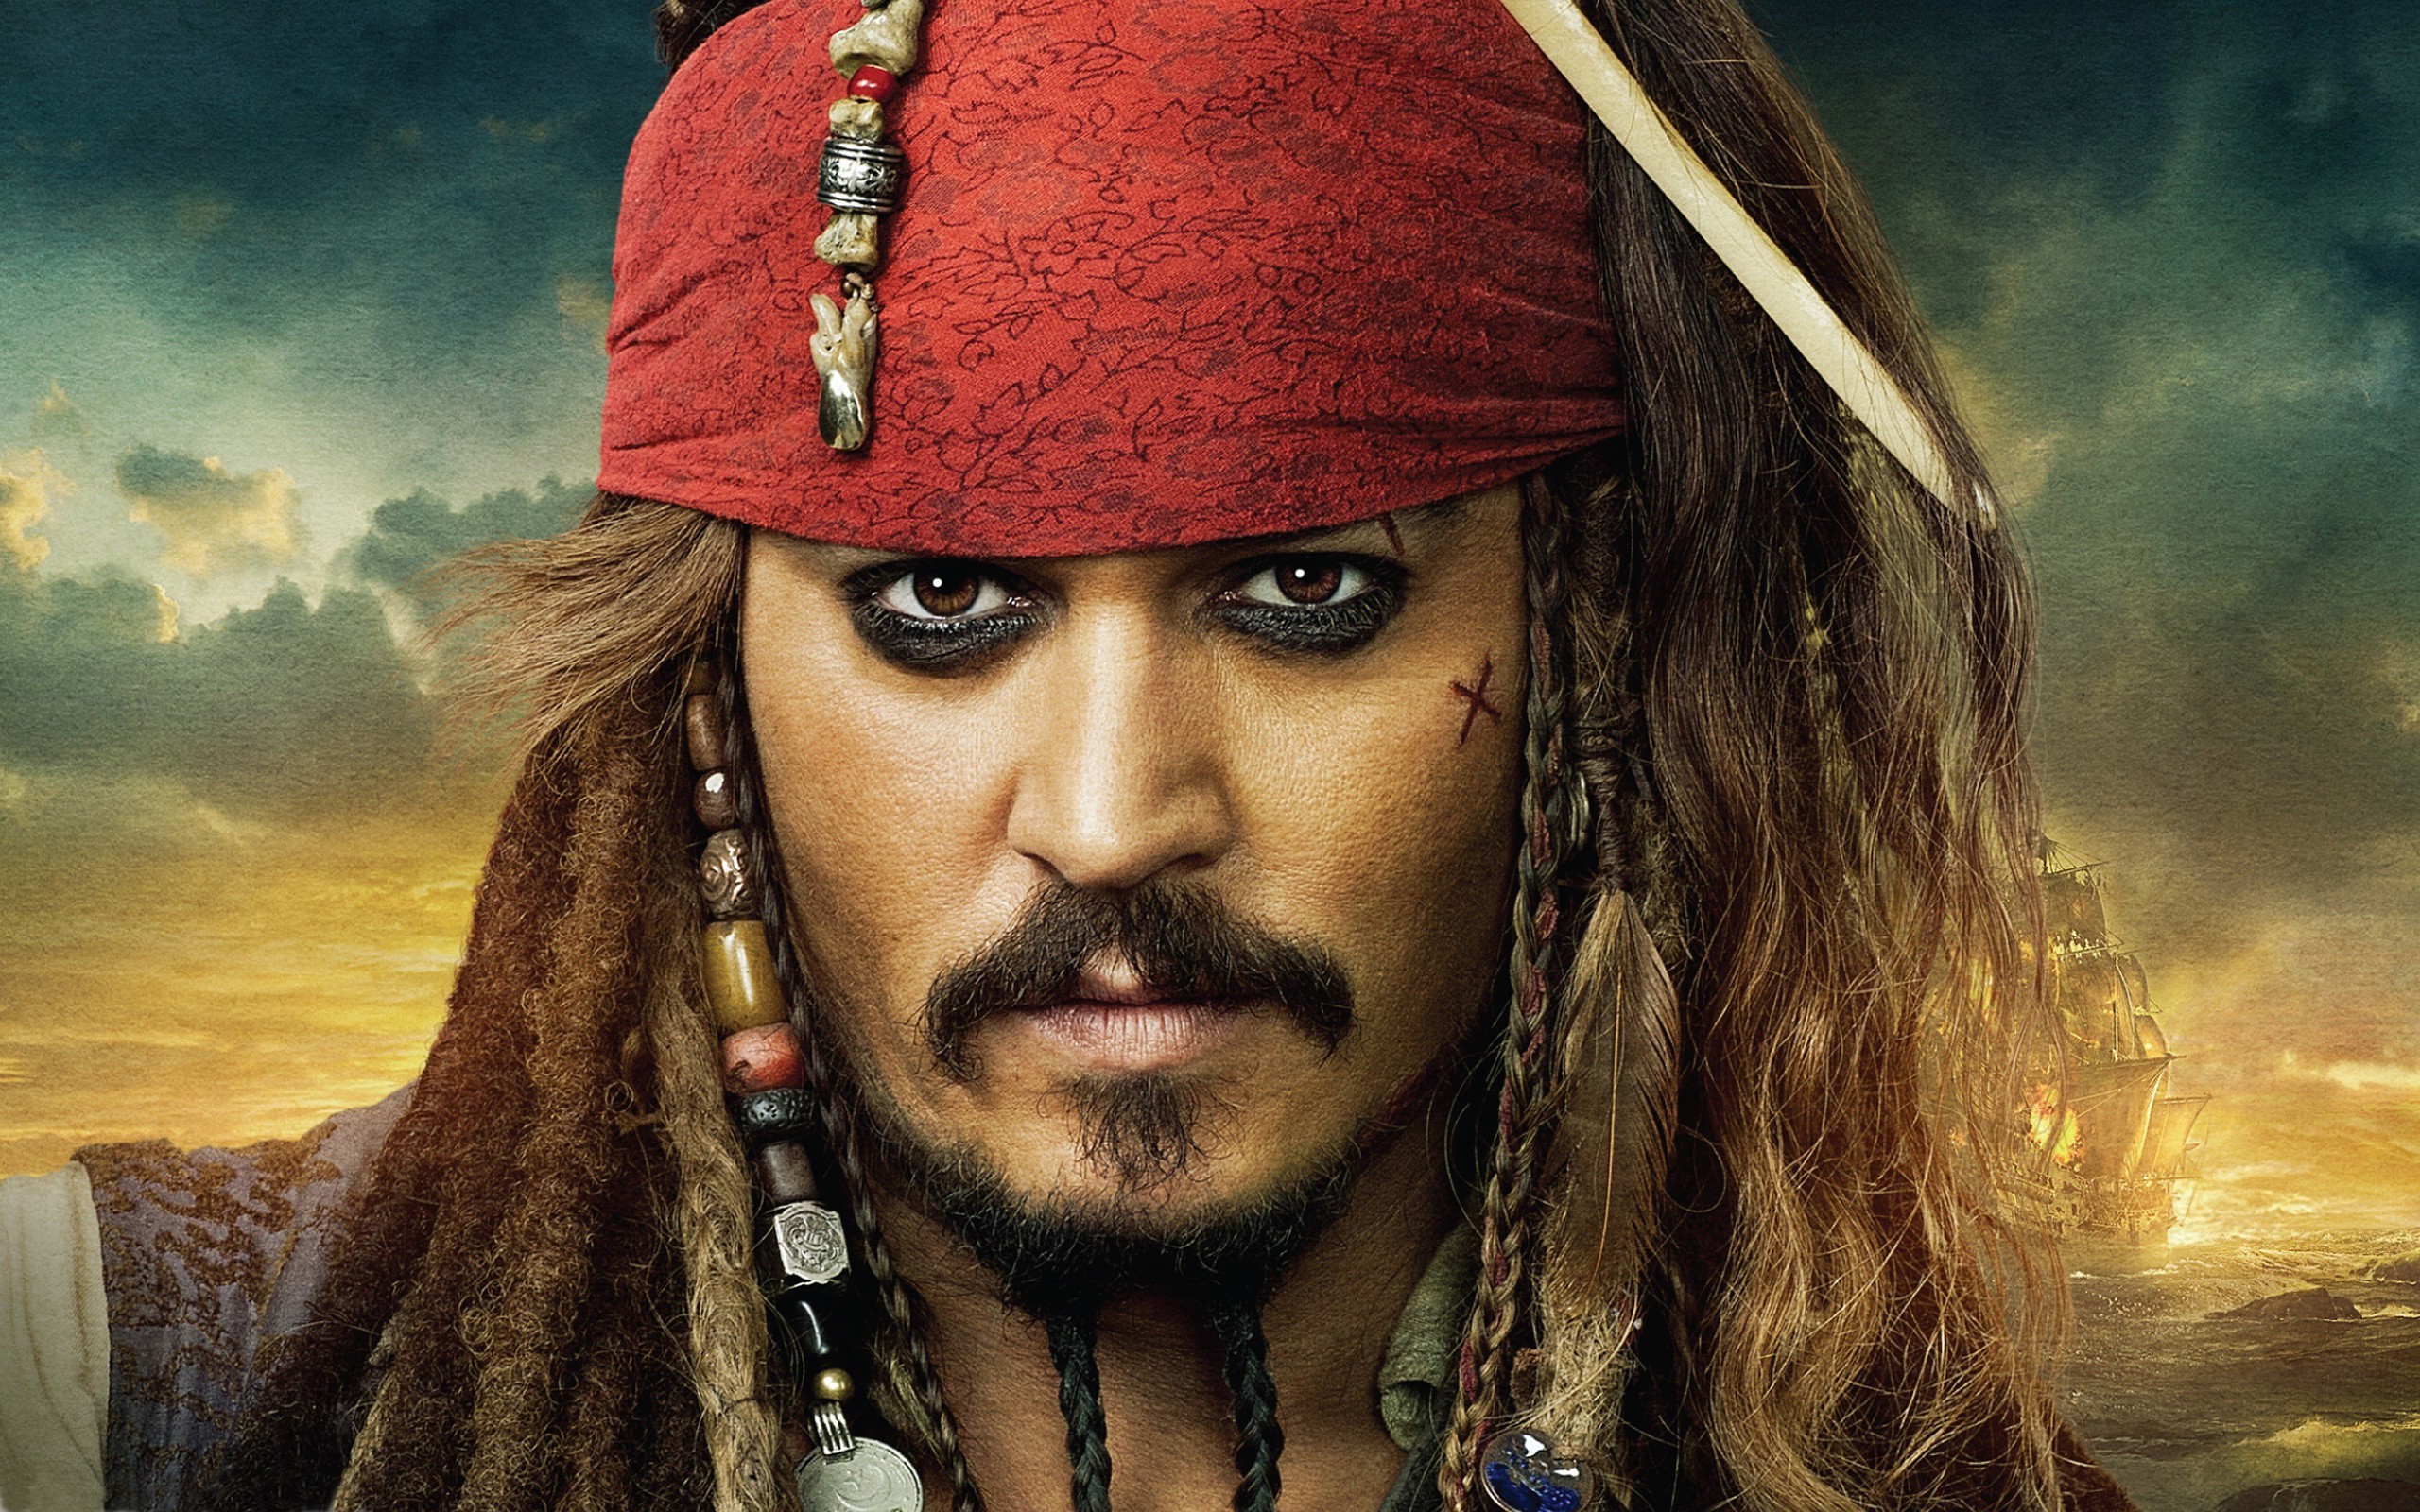 Pirates of the Caribbean: On Stranger download the new